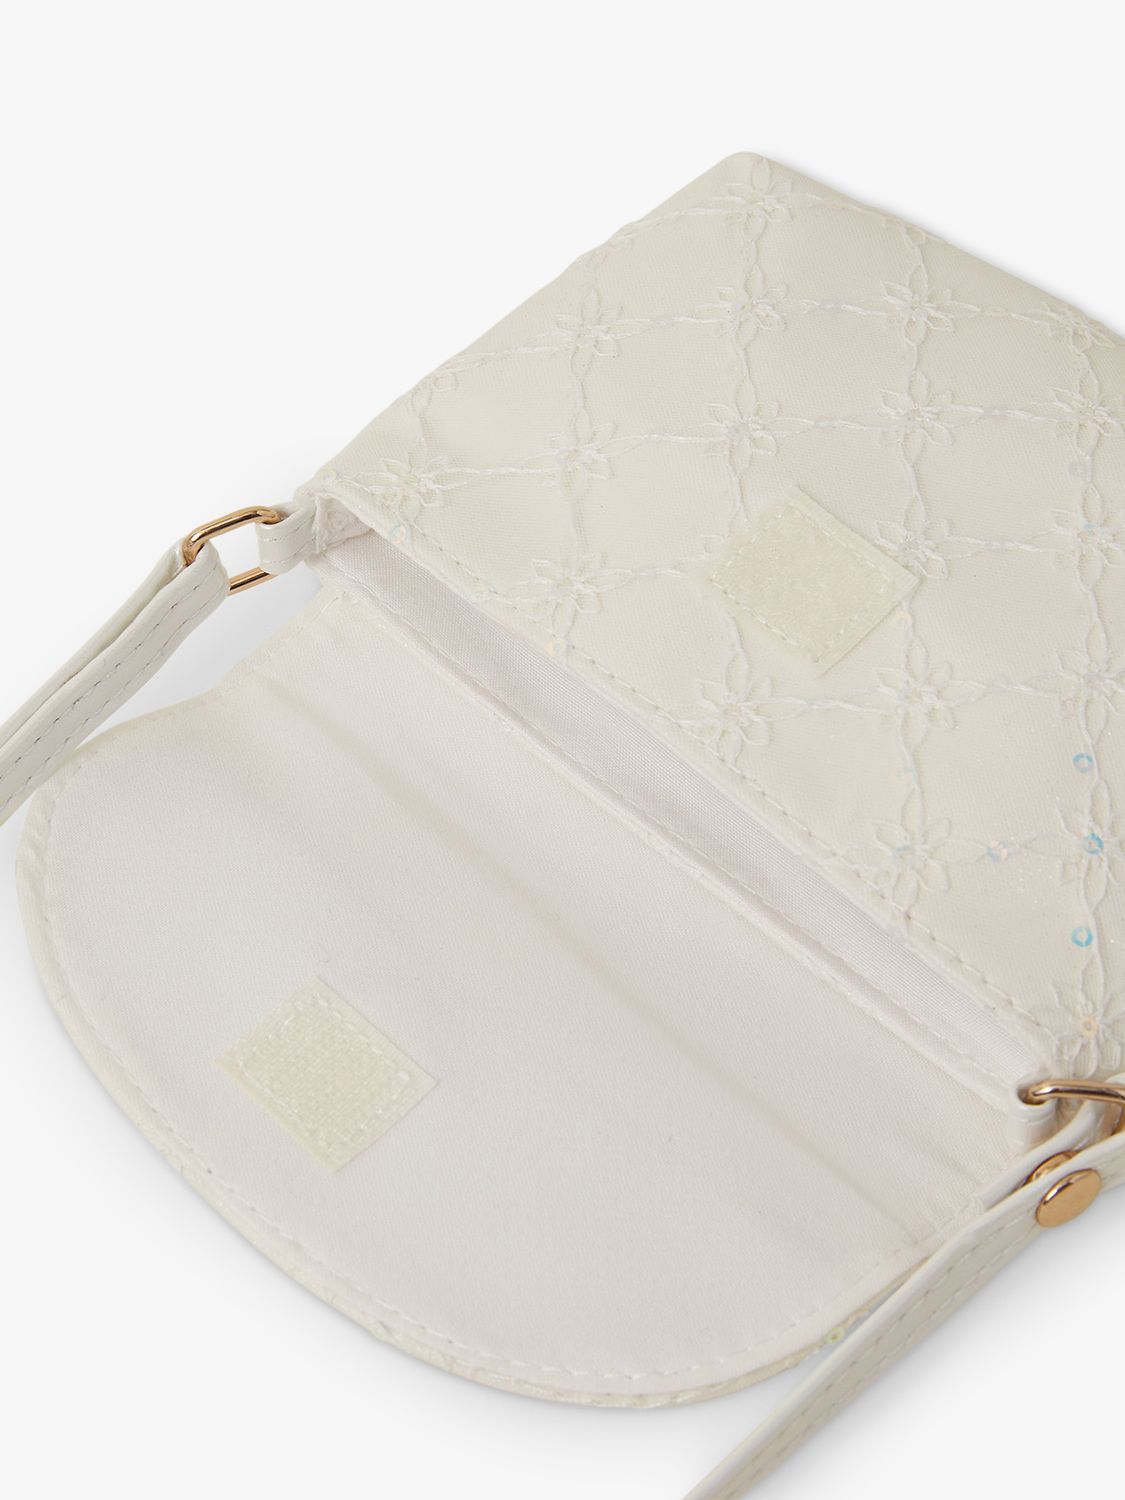 Buy Angels by Accessorize Kids' Lace Bow Bag, Ivory Online at johnlewis.com